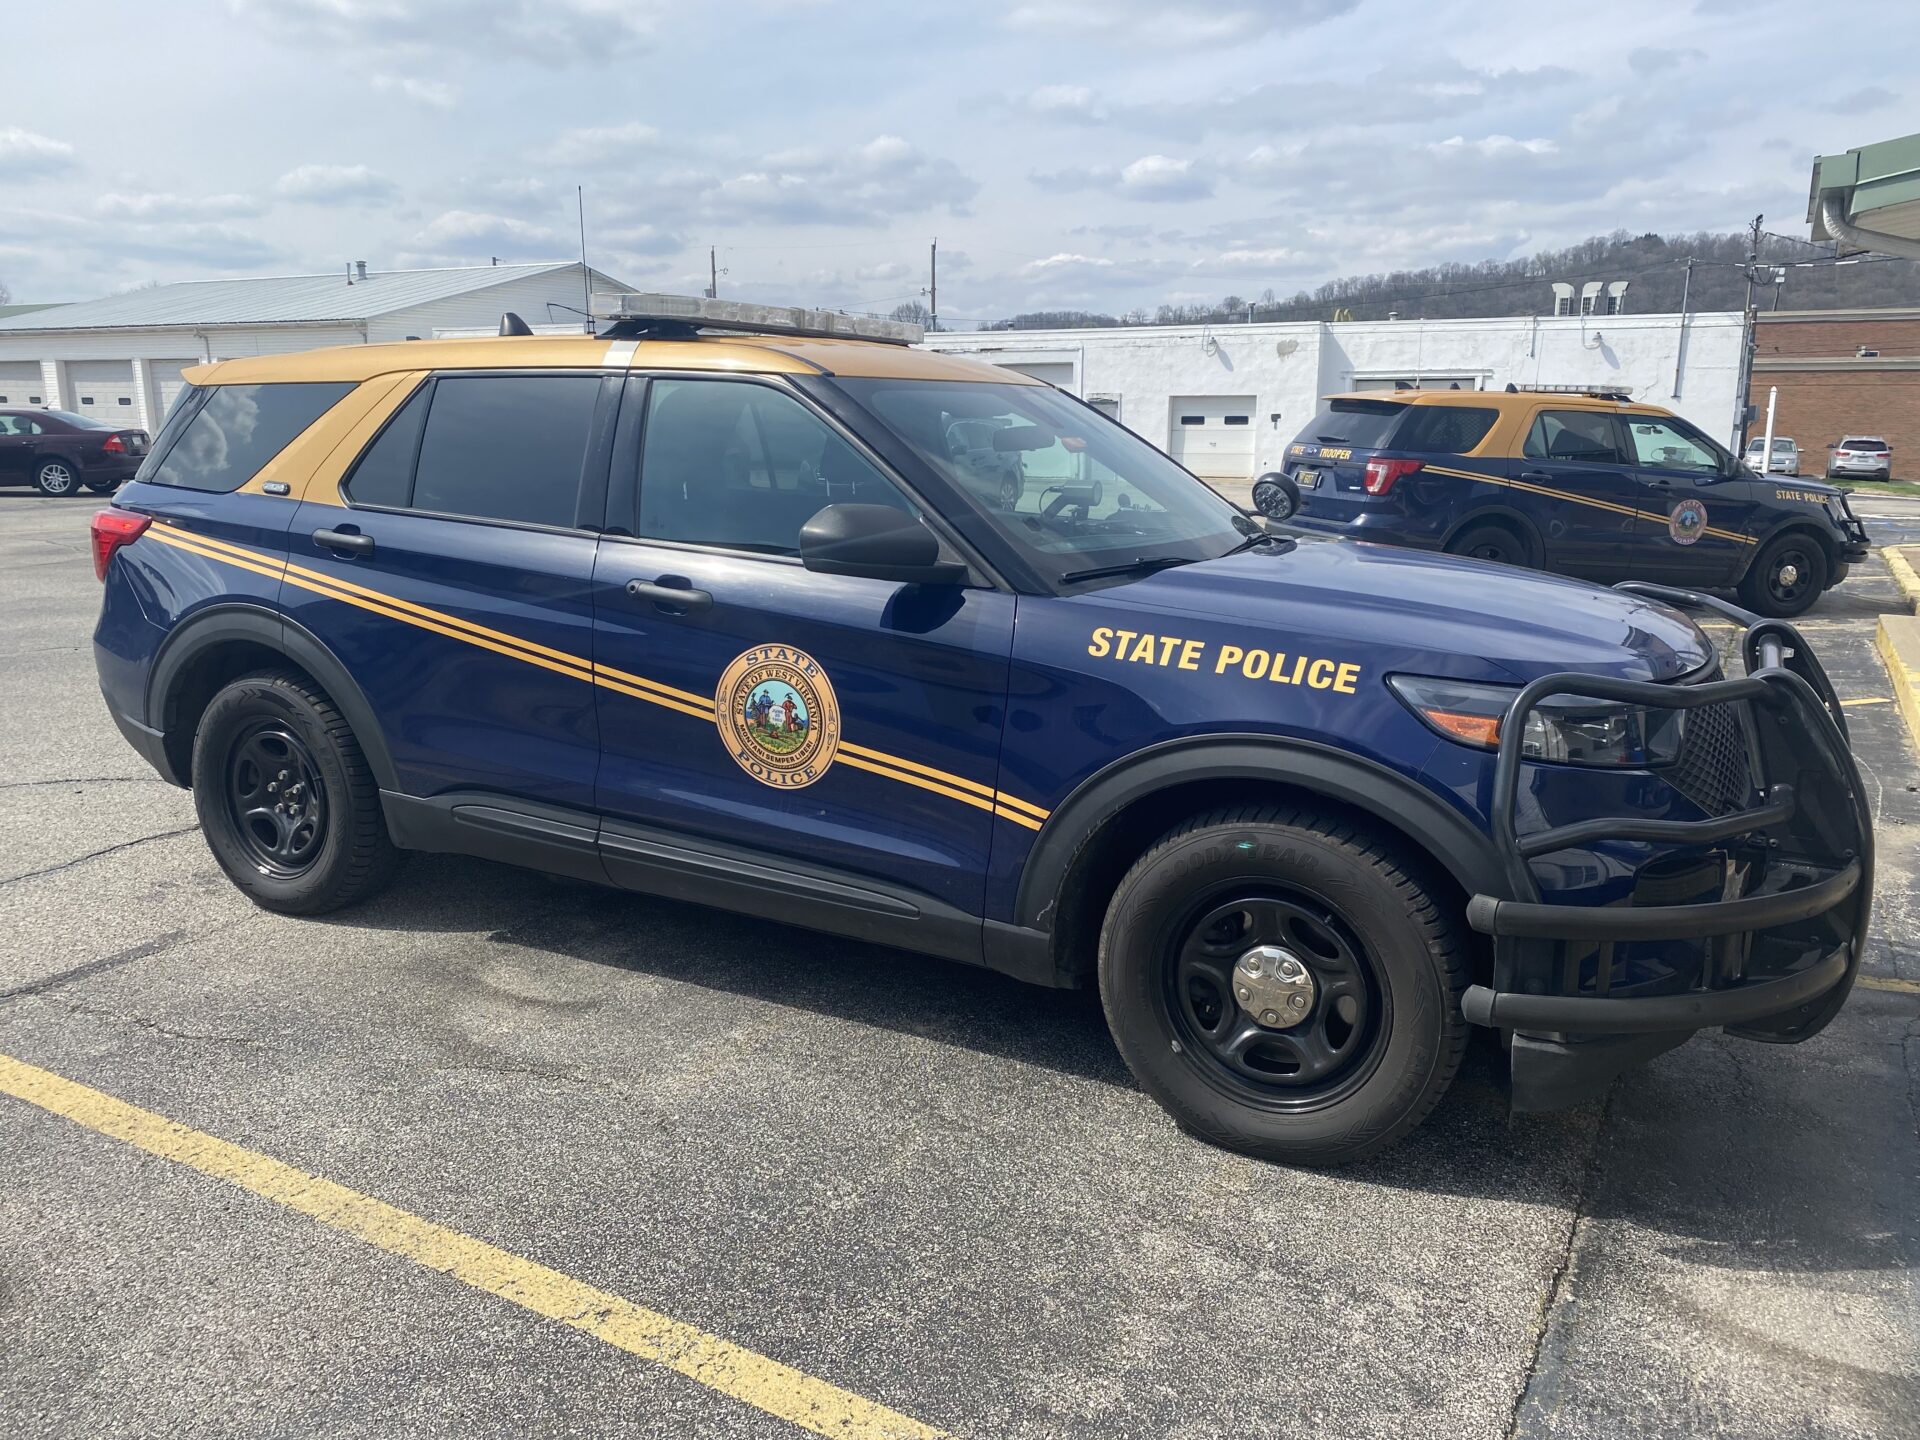 W.Va. State Police Superintendent Announces Reforms, Changes, Upgrades